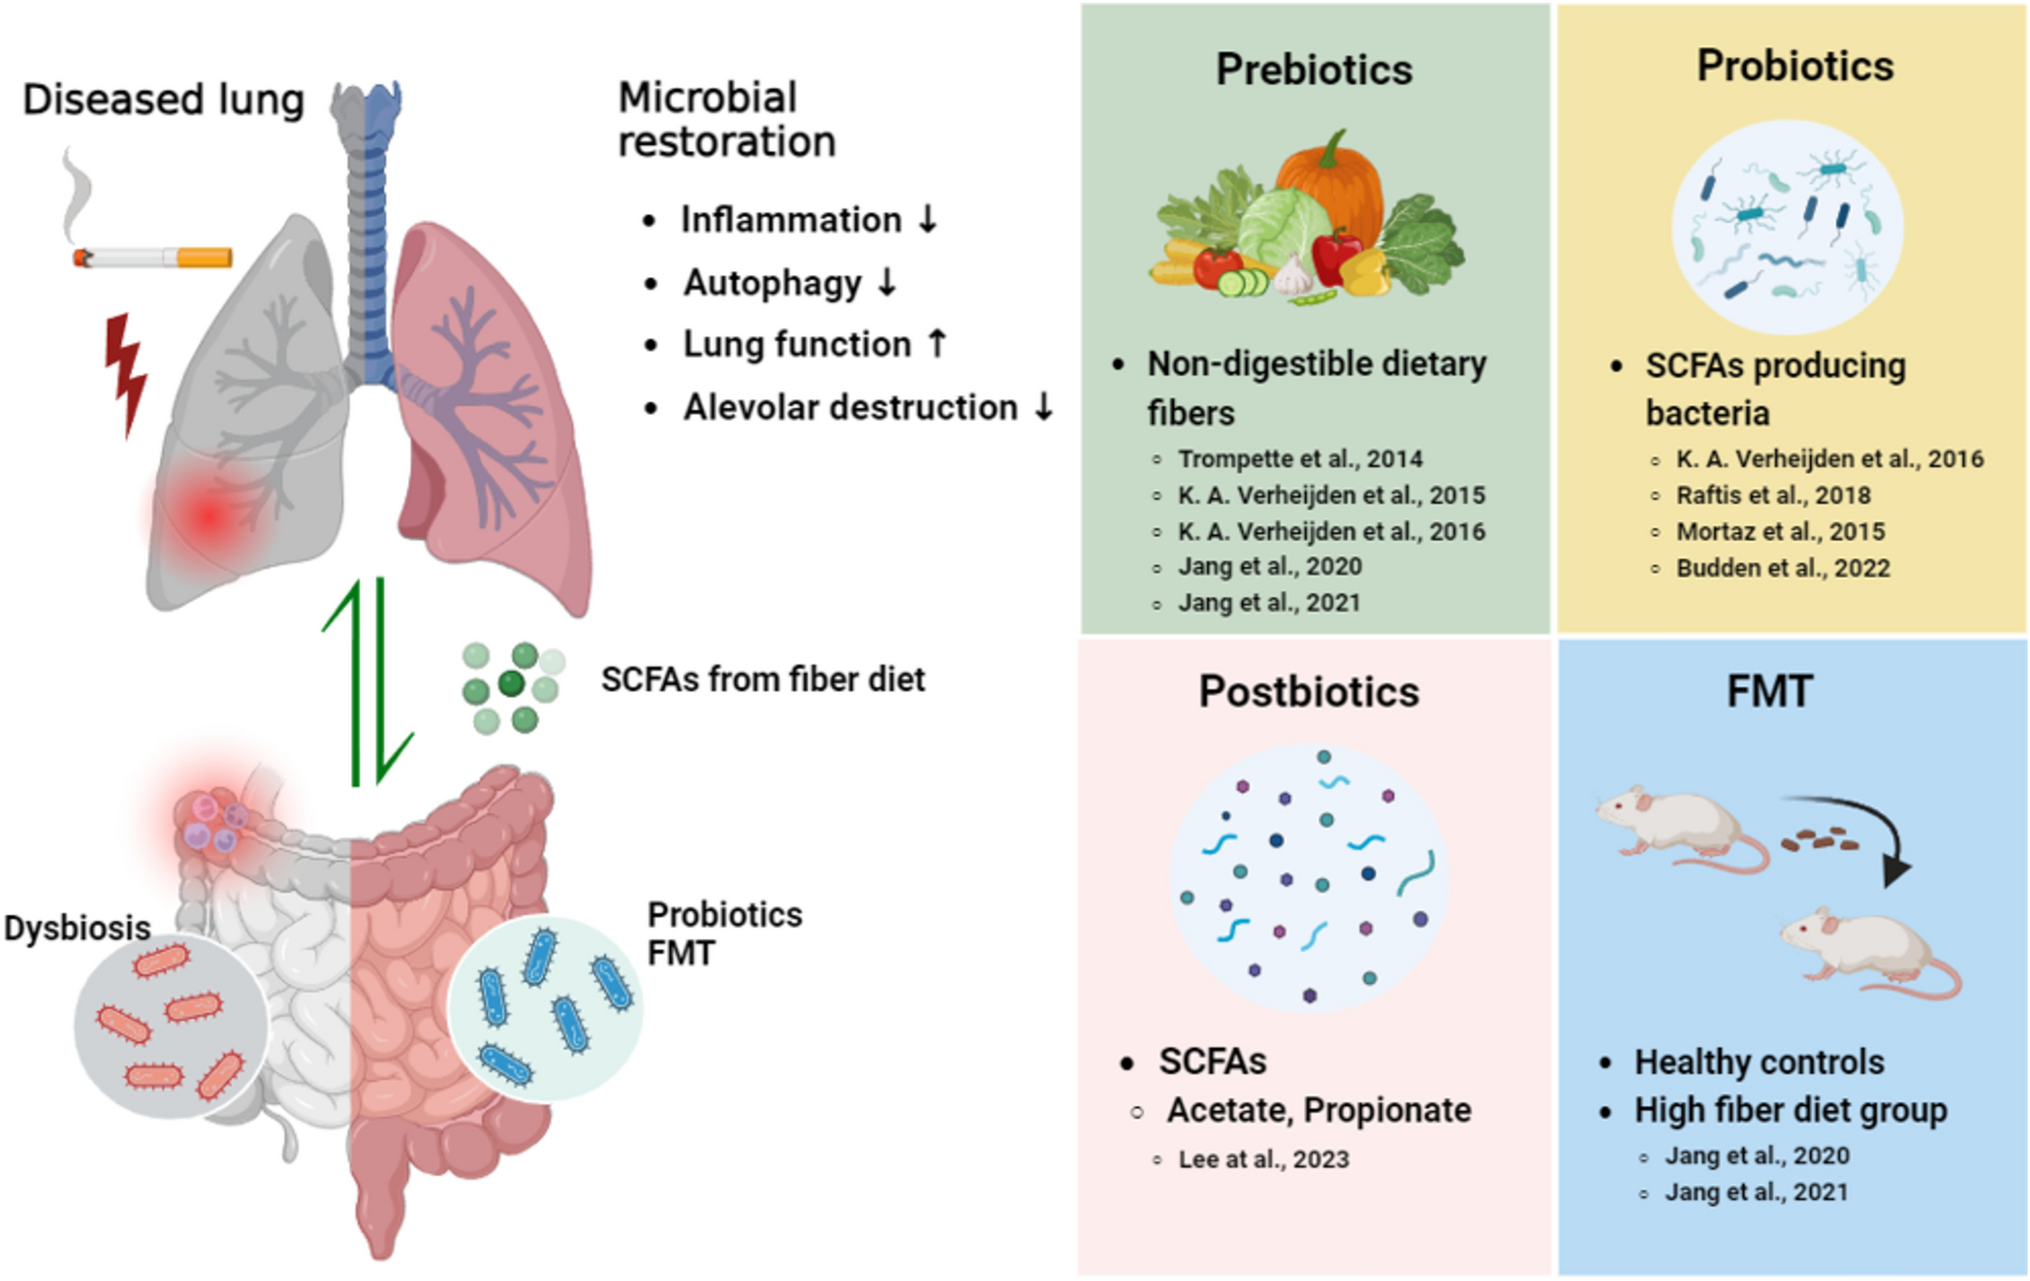 Application of Microbiome-Based Therapies in Chronic Respiratory Diseases